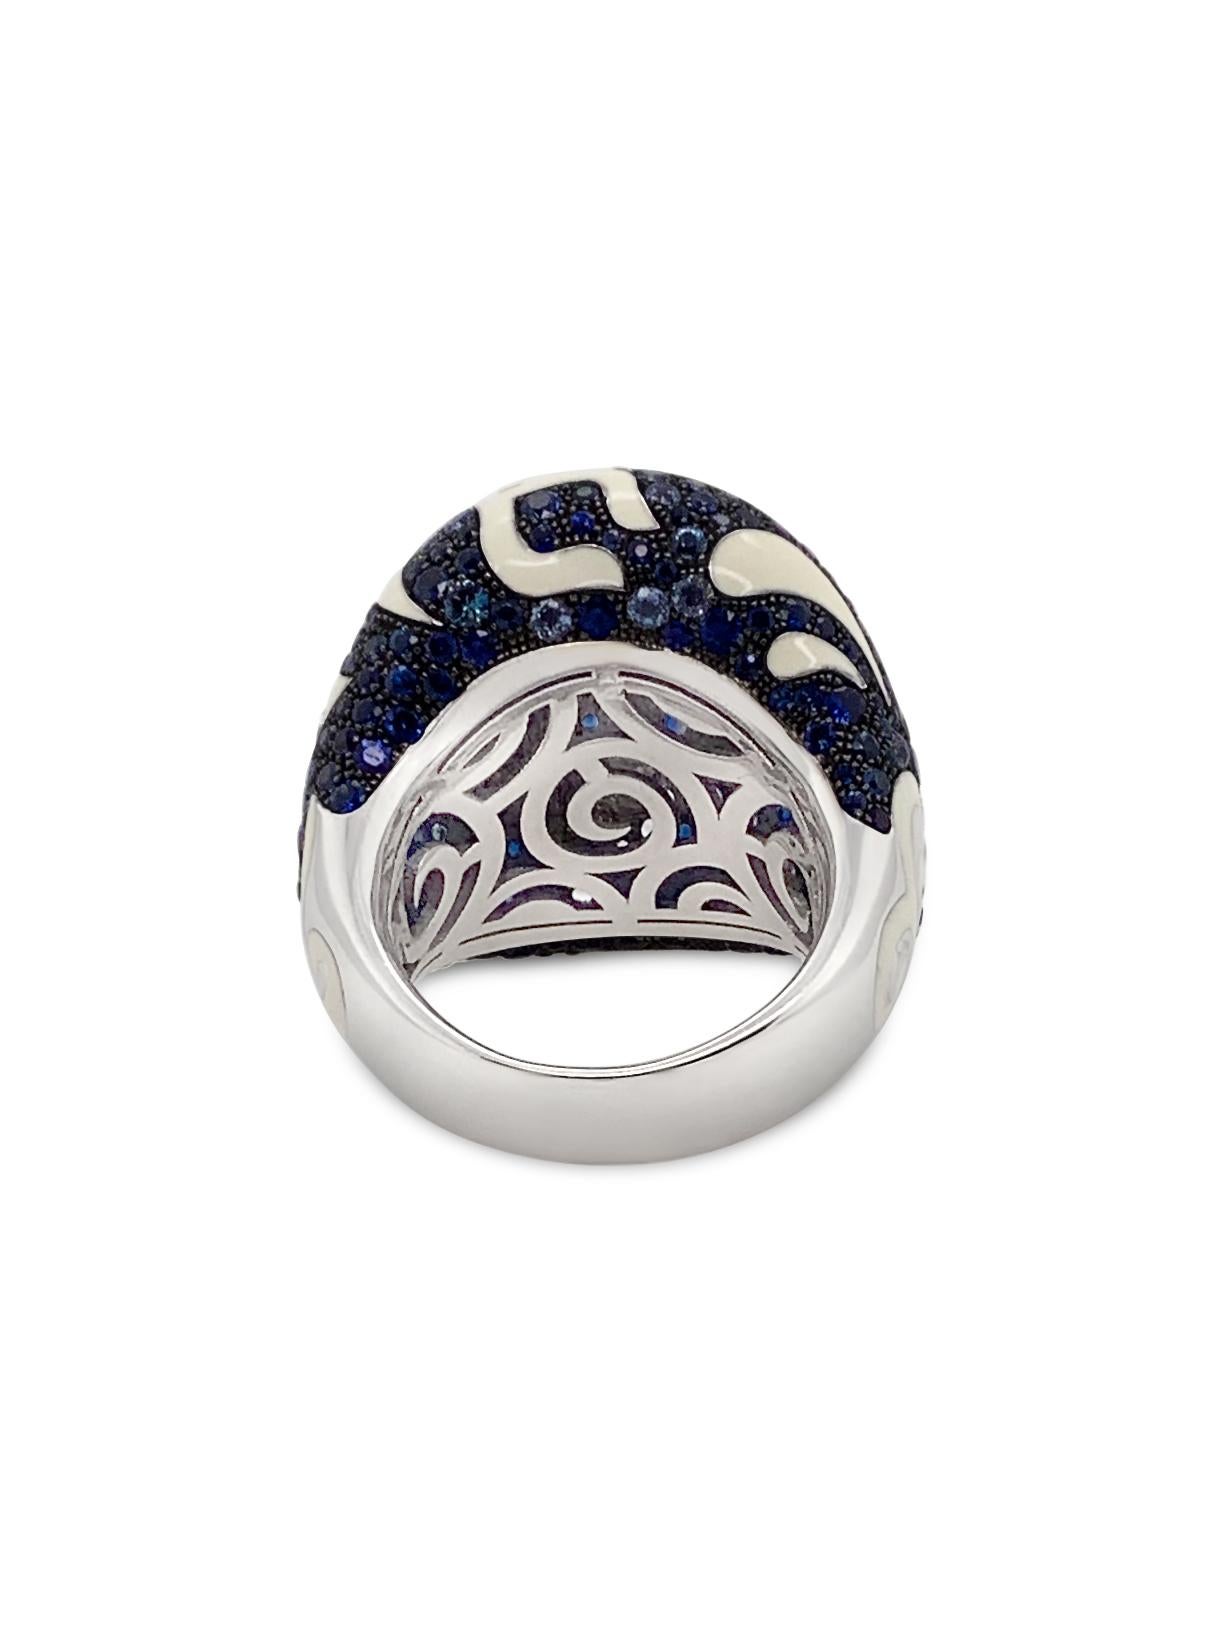 Contemporary Roberto Coin 17.50 Carat Total Weight Sapphire Enamel 18 Karat Gold Dome Ring